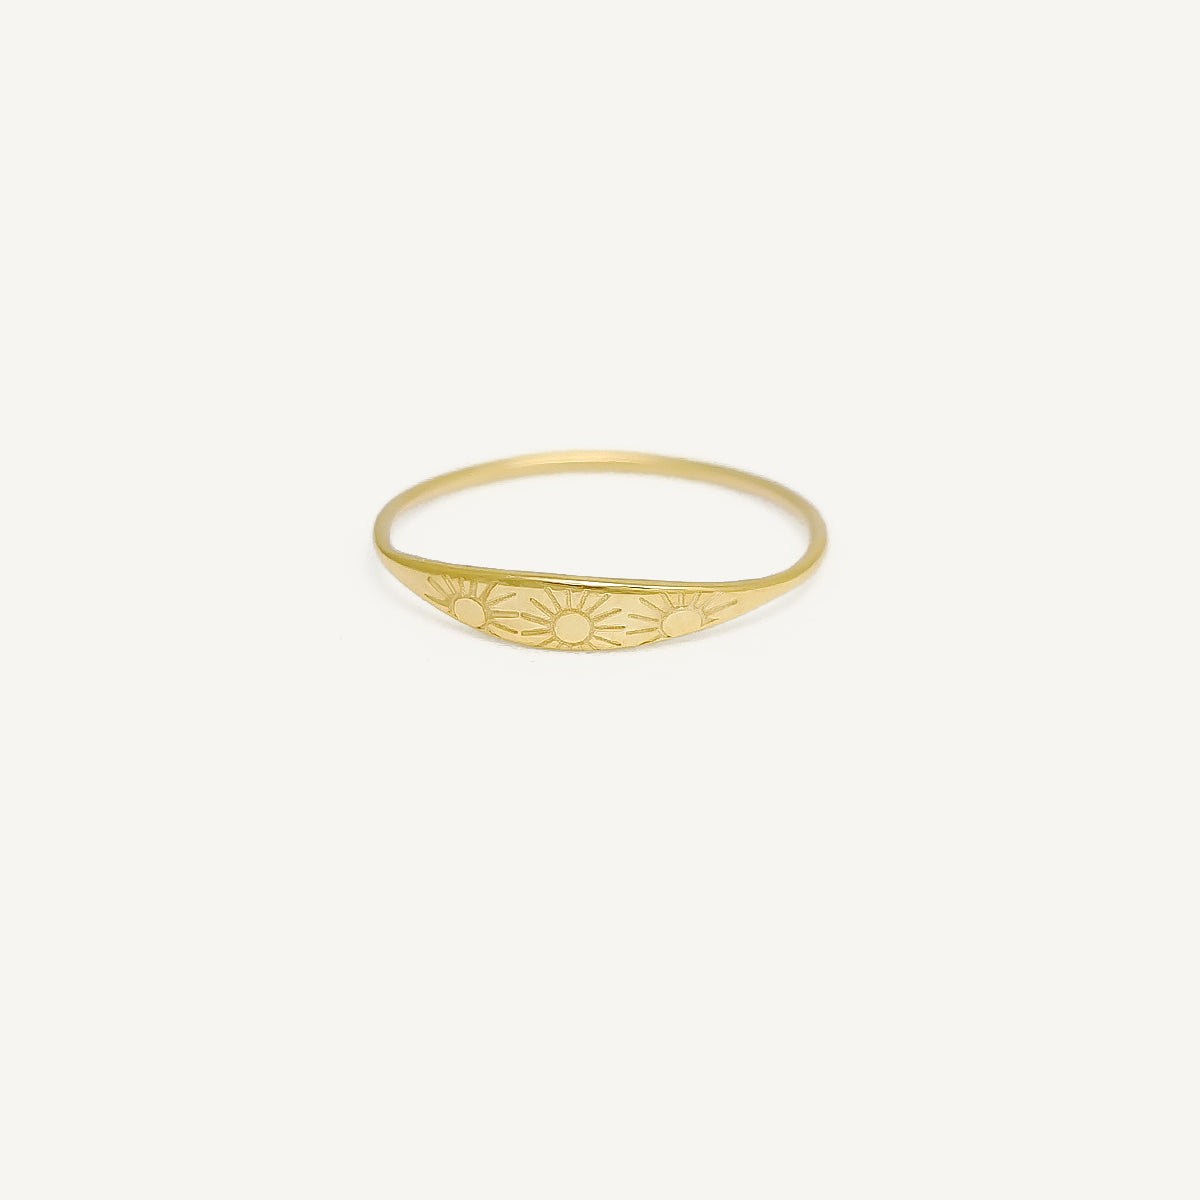 The Sun Signet Ring in Solid Gold